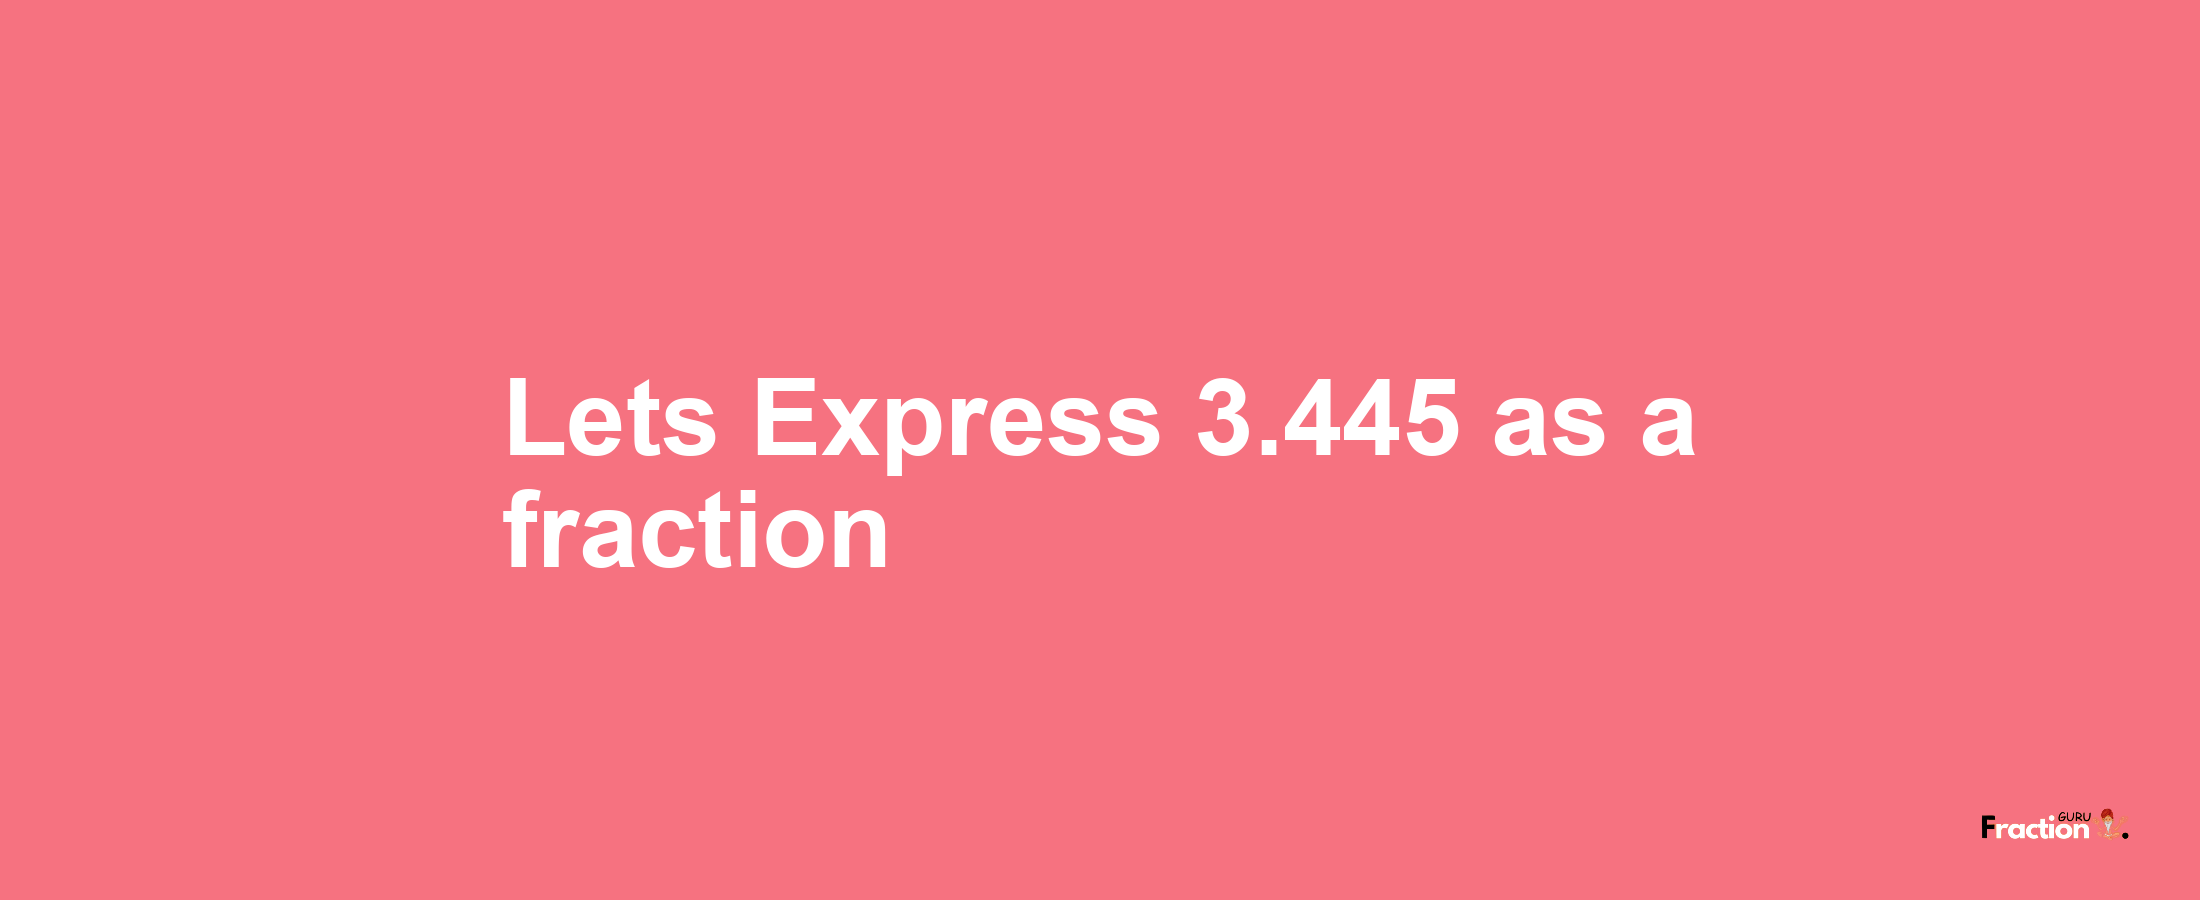 Lets Express 3.445 as afraction